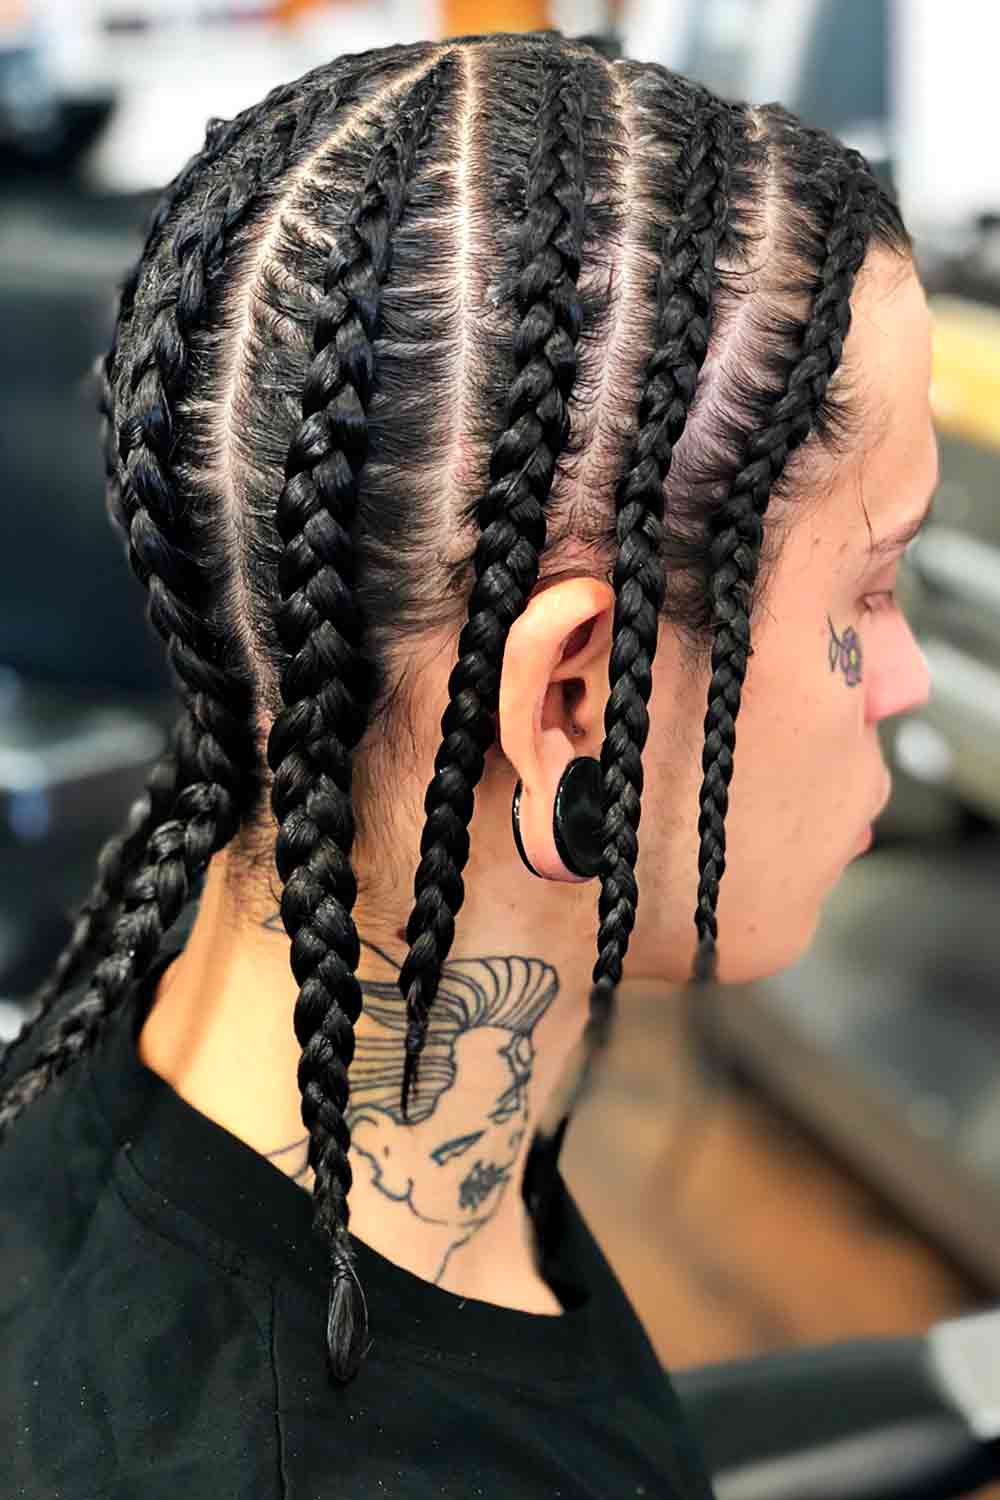 African Hair Braiding: Fascinating Styles & Different Types Of Braids